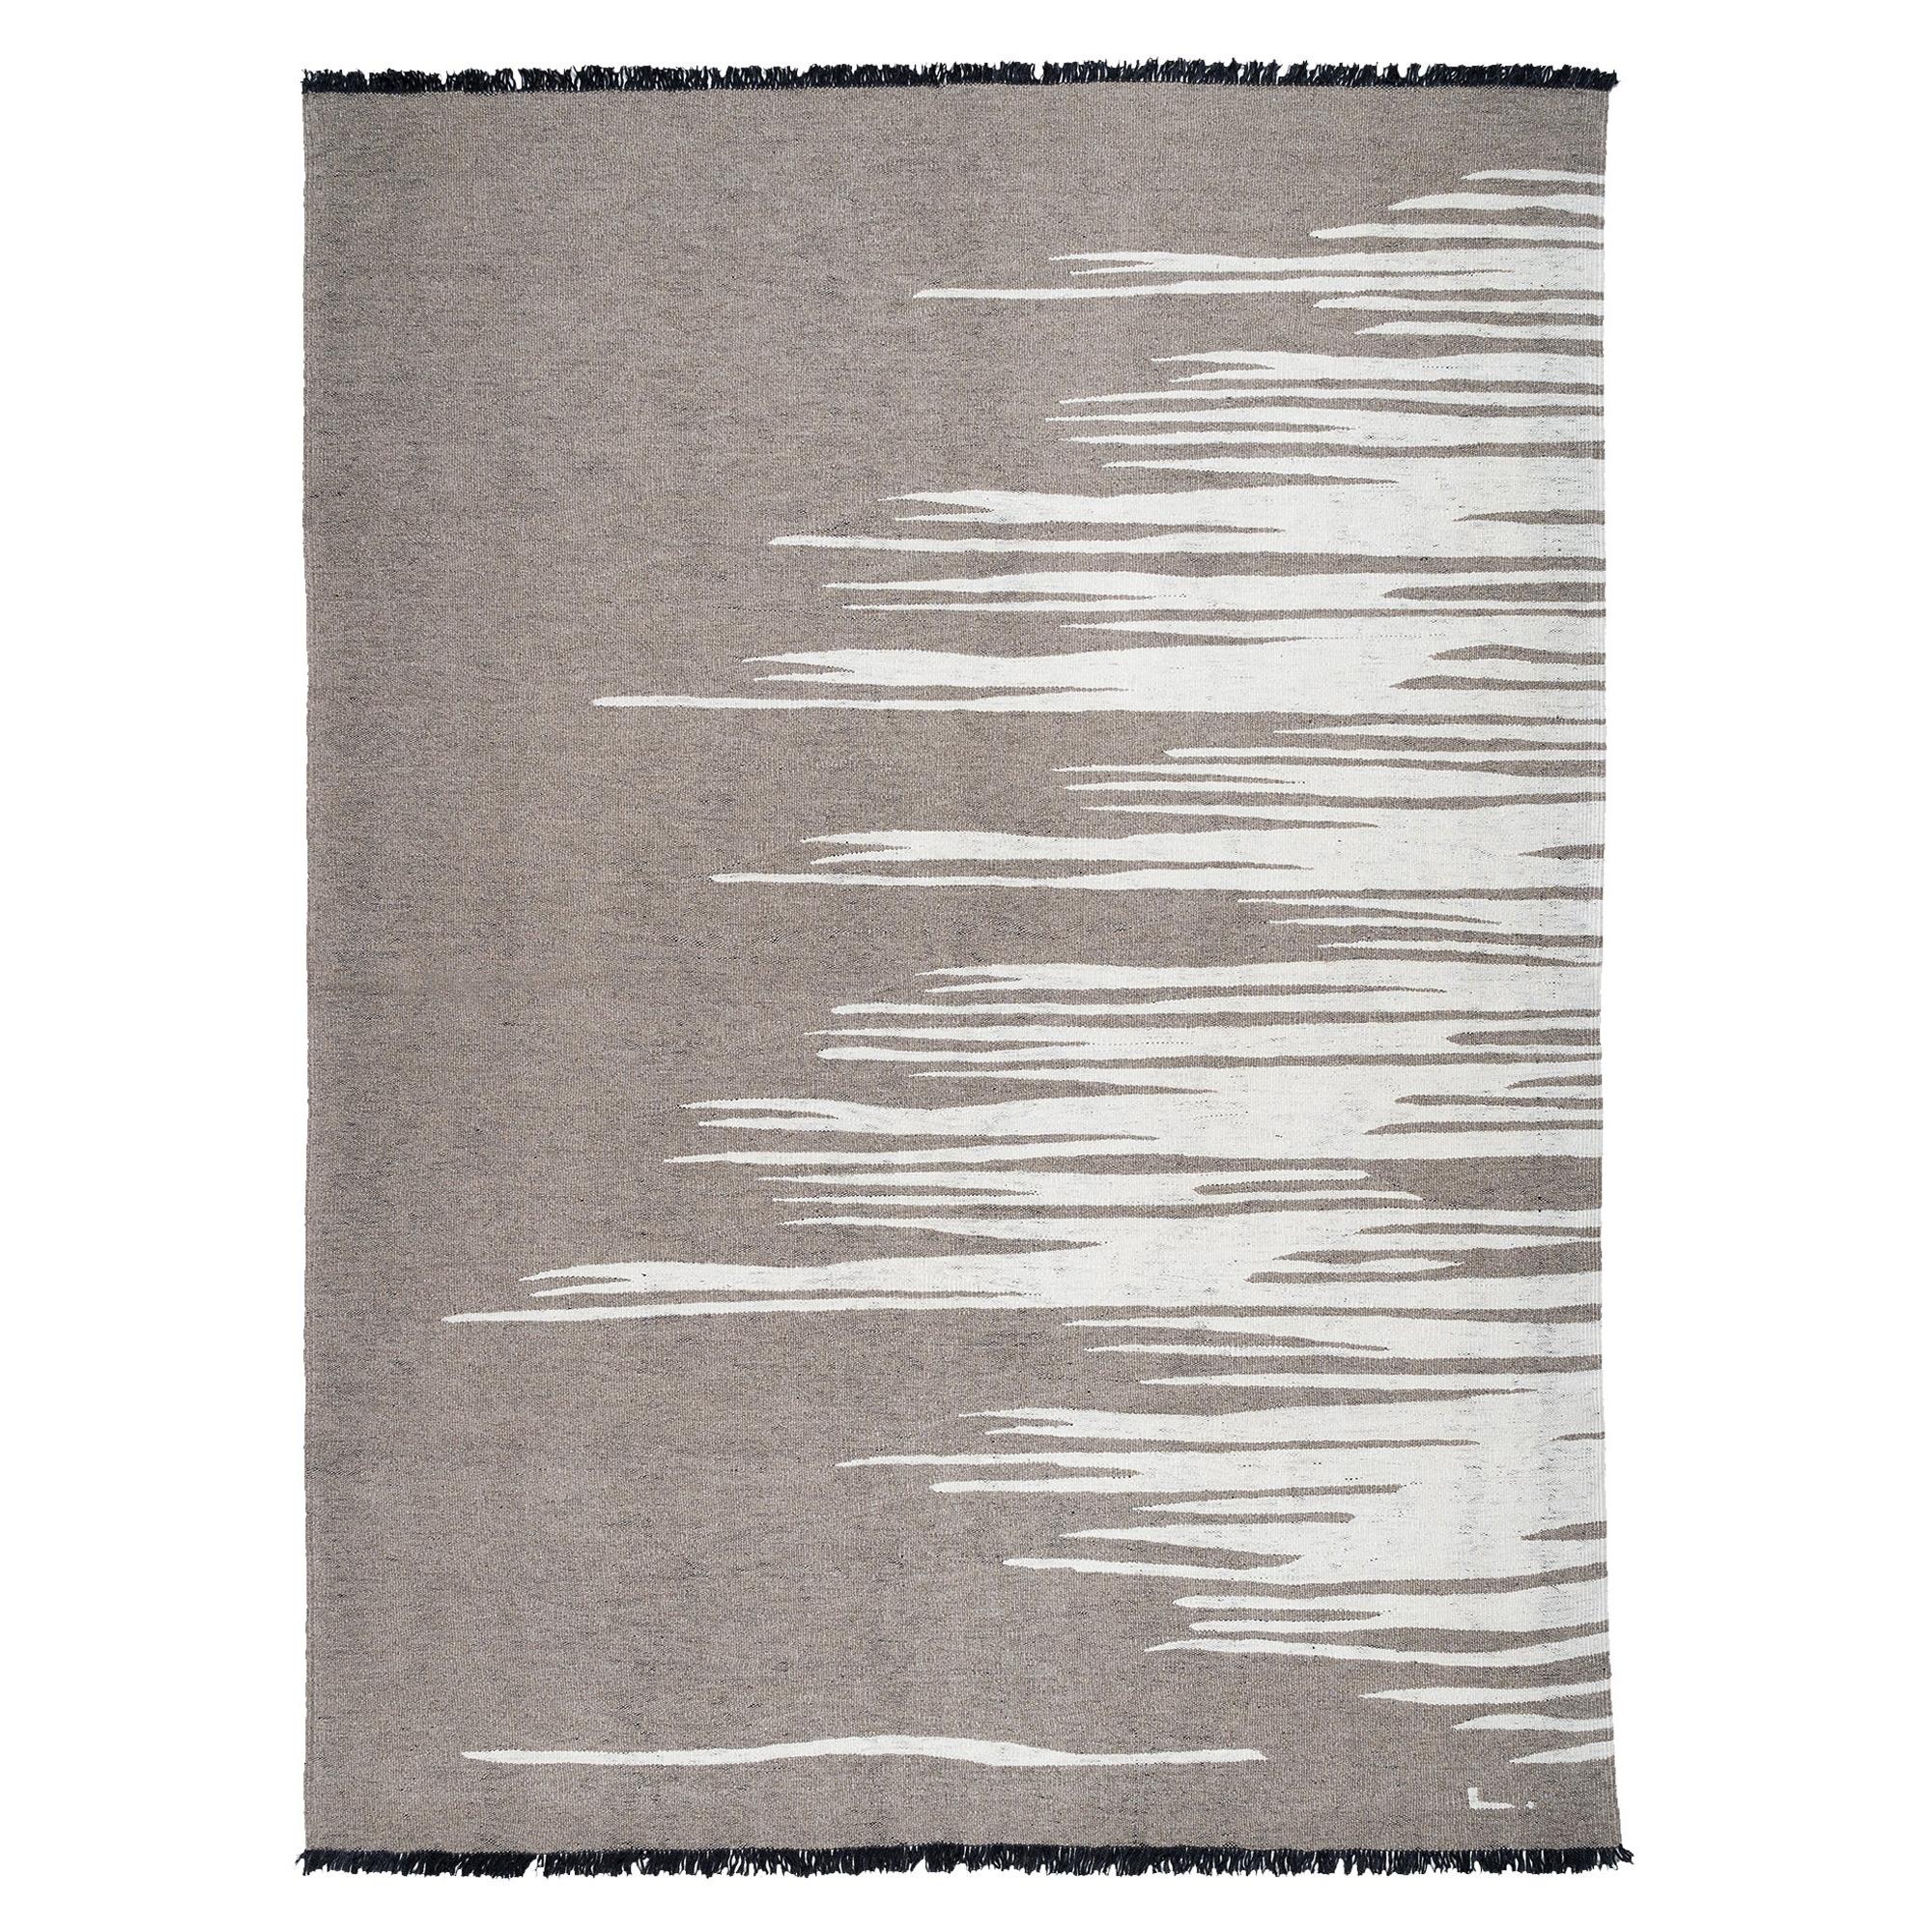 Handwoven Wool Kilim Rug Ege No 3, Contemporary Earthy Gray and Dune White For Sale